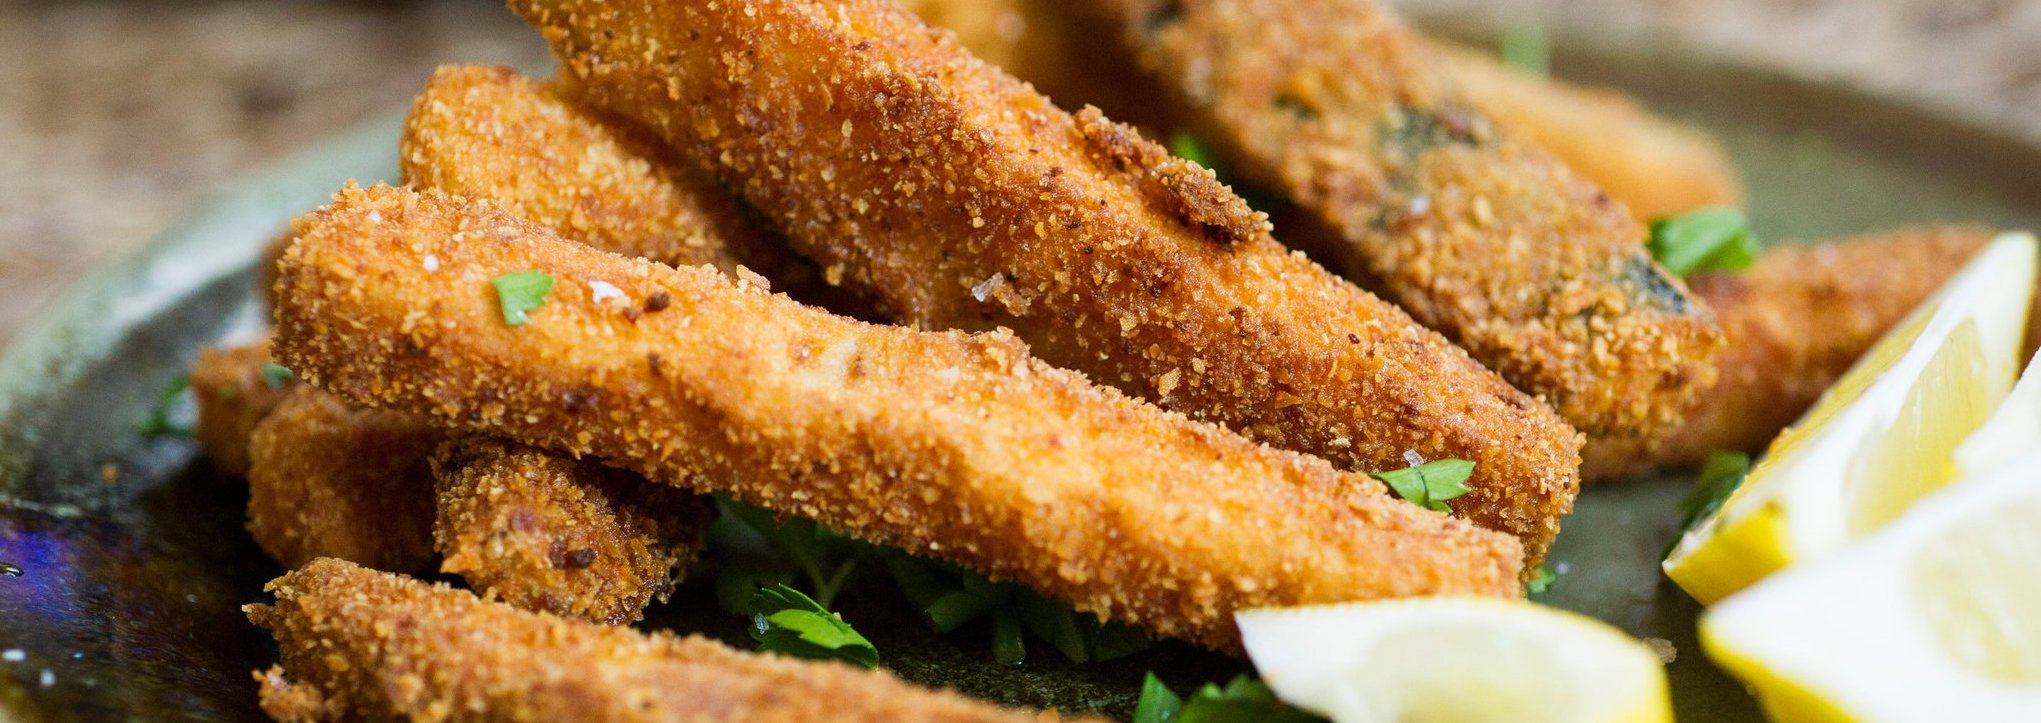 Appetizers - Beer Battered Zucchini Sticks